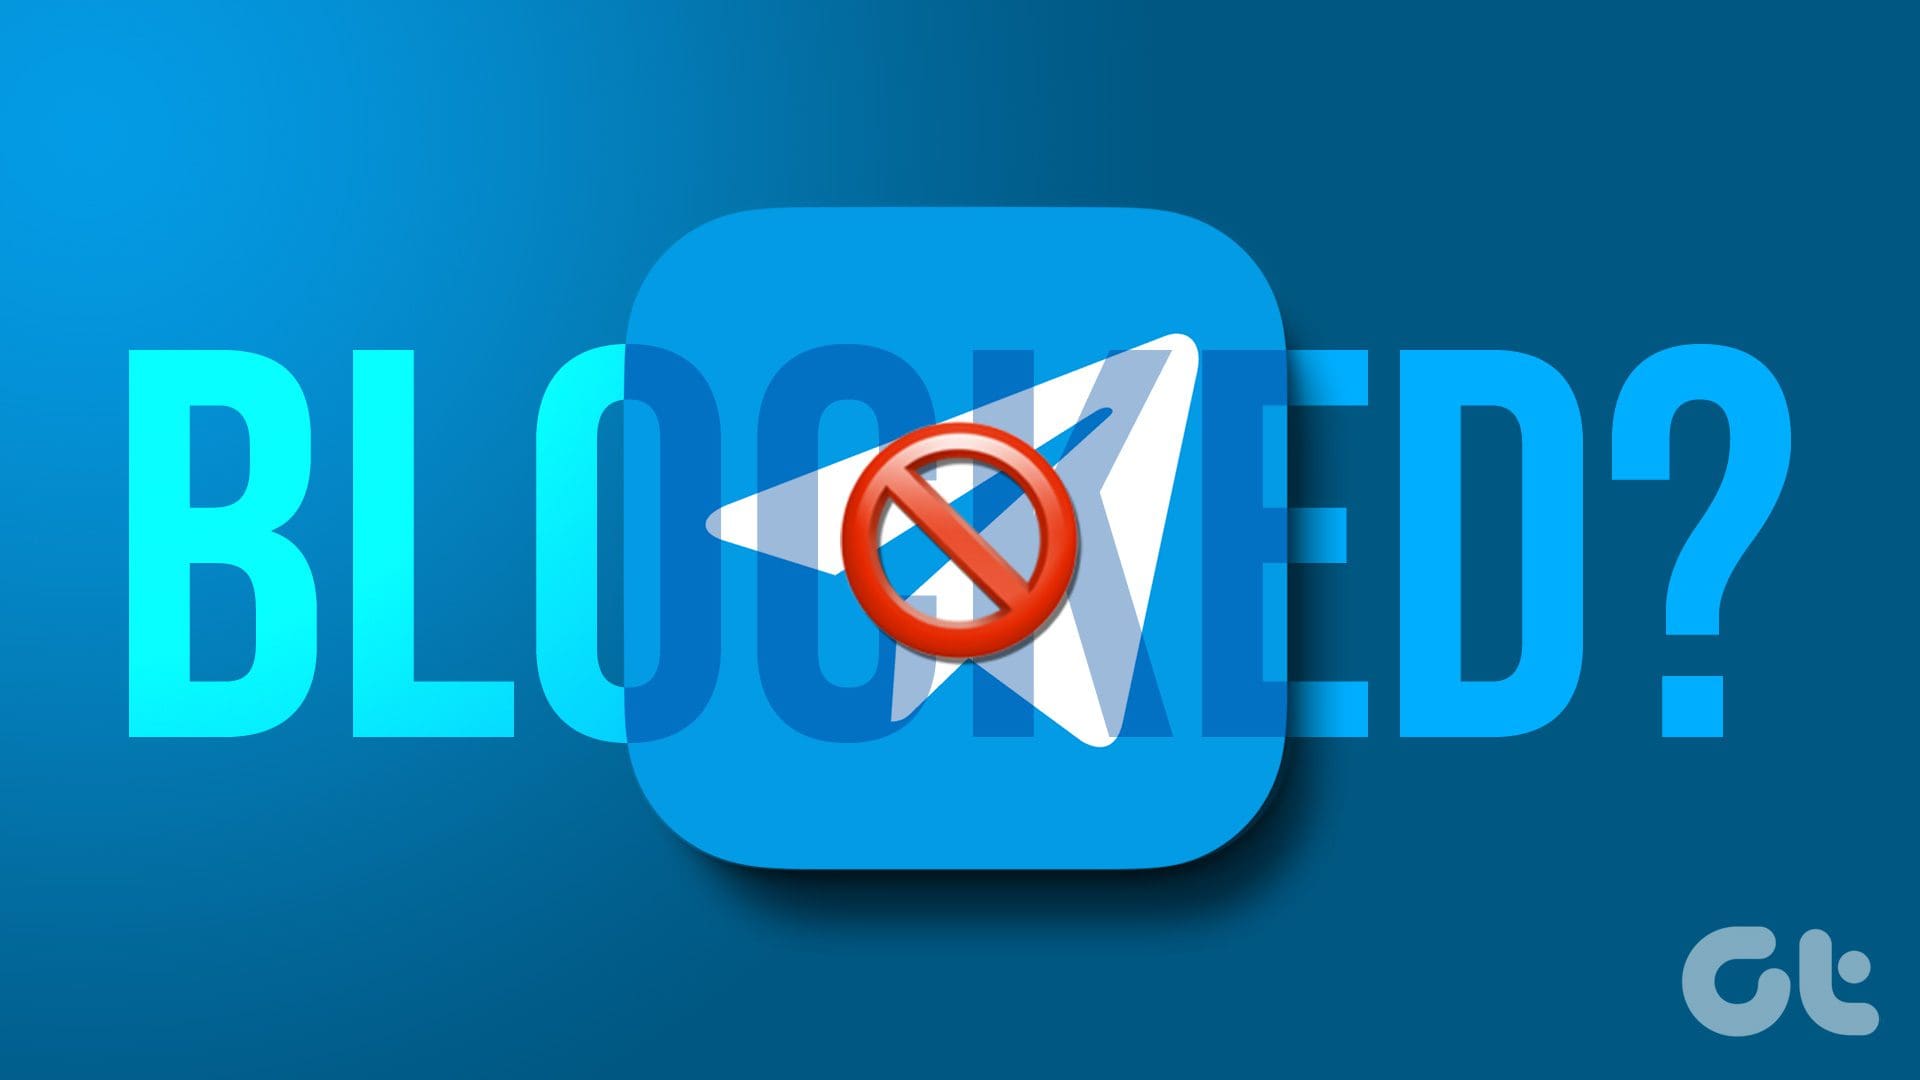 7 Ways to Know if Someone Blocked You on Telegram - Guiding Tech